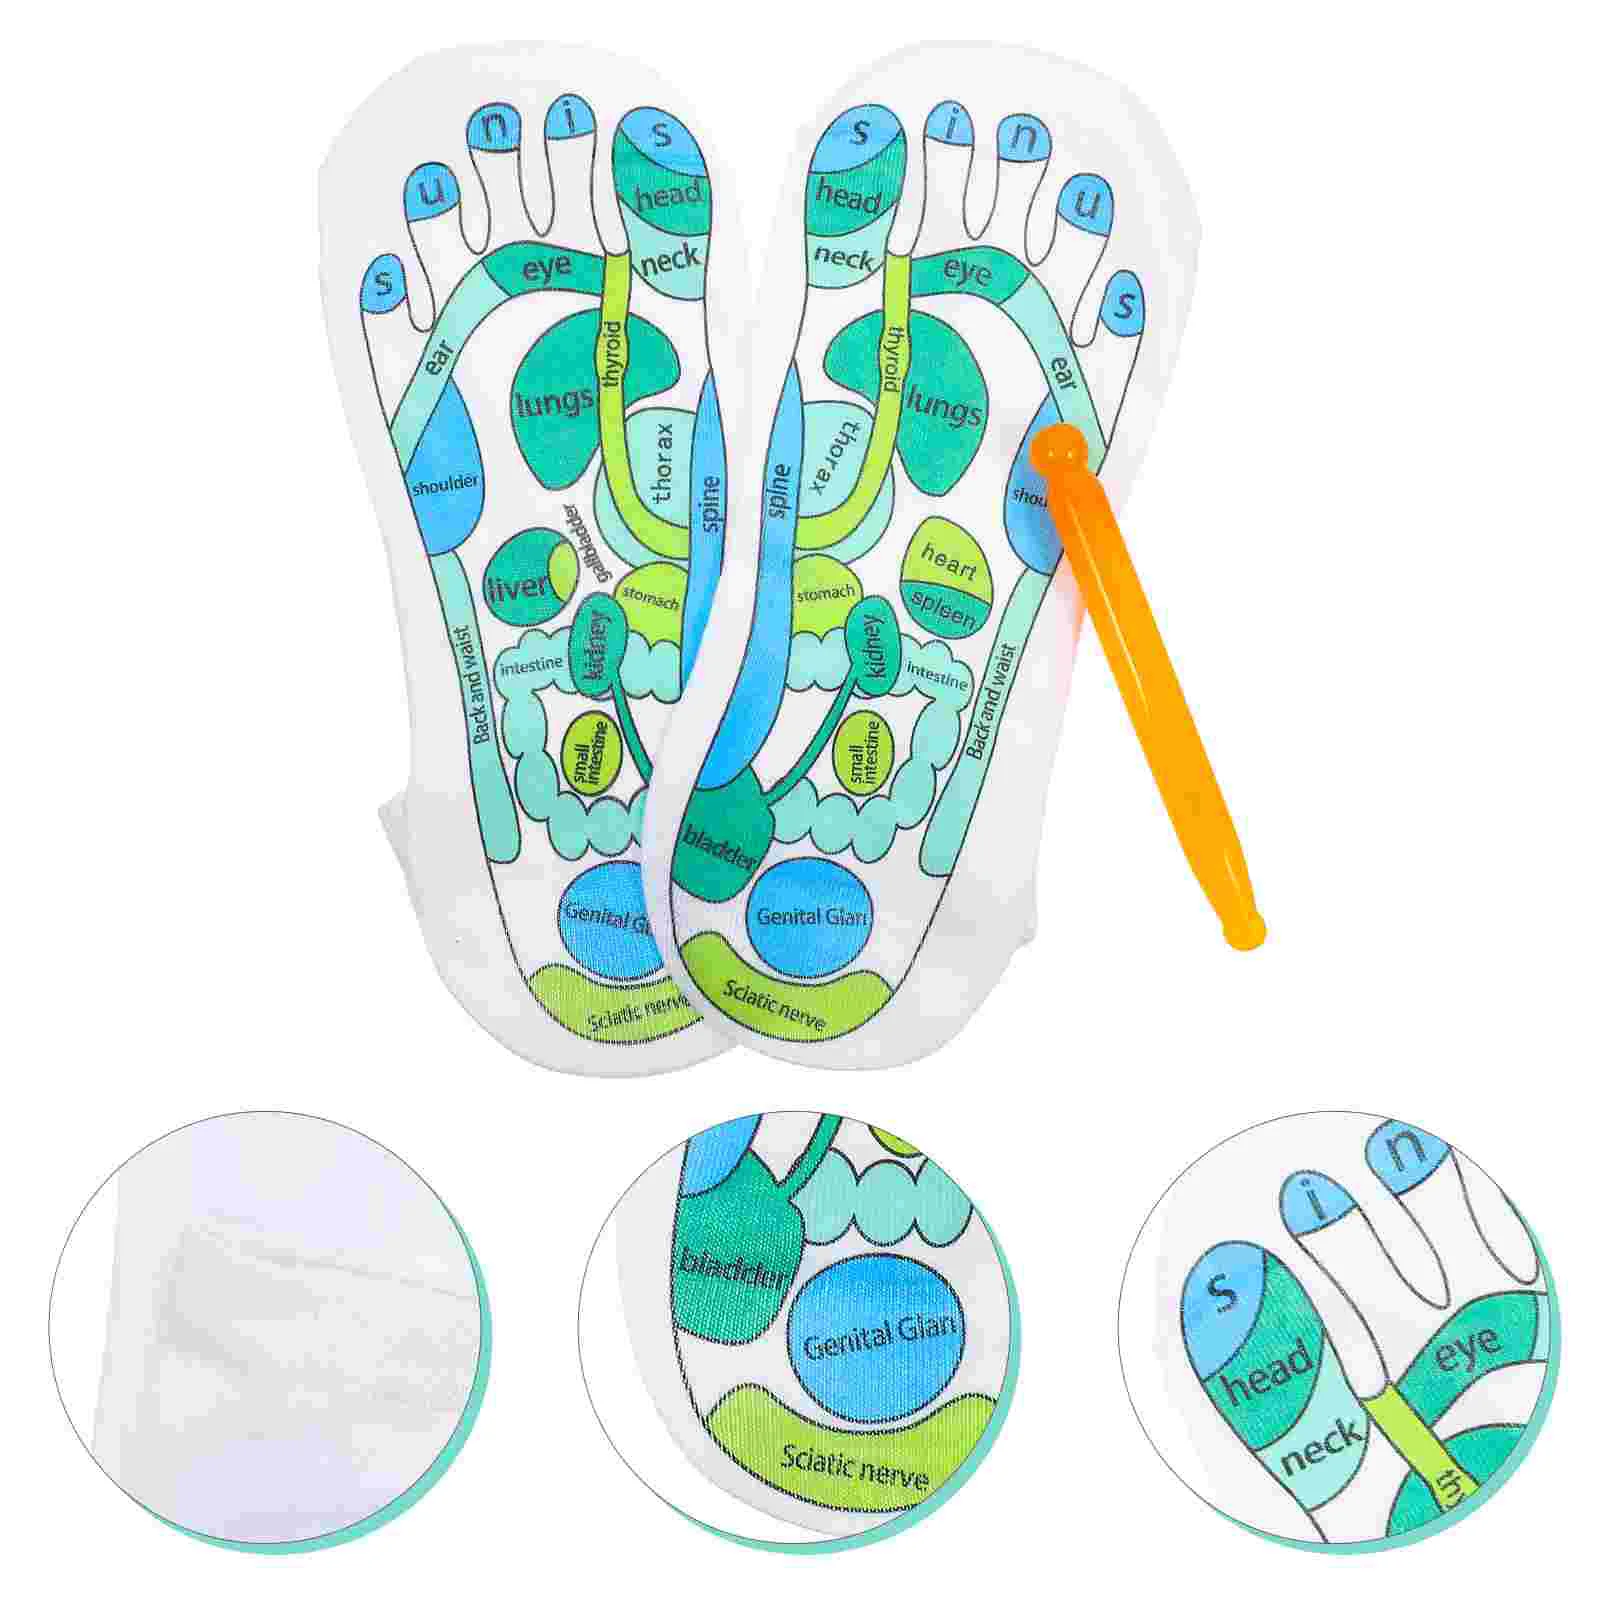 Foot Socks Elastic Acupressure for Reflexology Tools Charts Acupoint Printed Miss gloves hand reflexology acupressure acupoint tools glove hands point socks mittens reusable household spa foot exfoliator